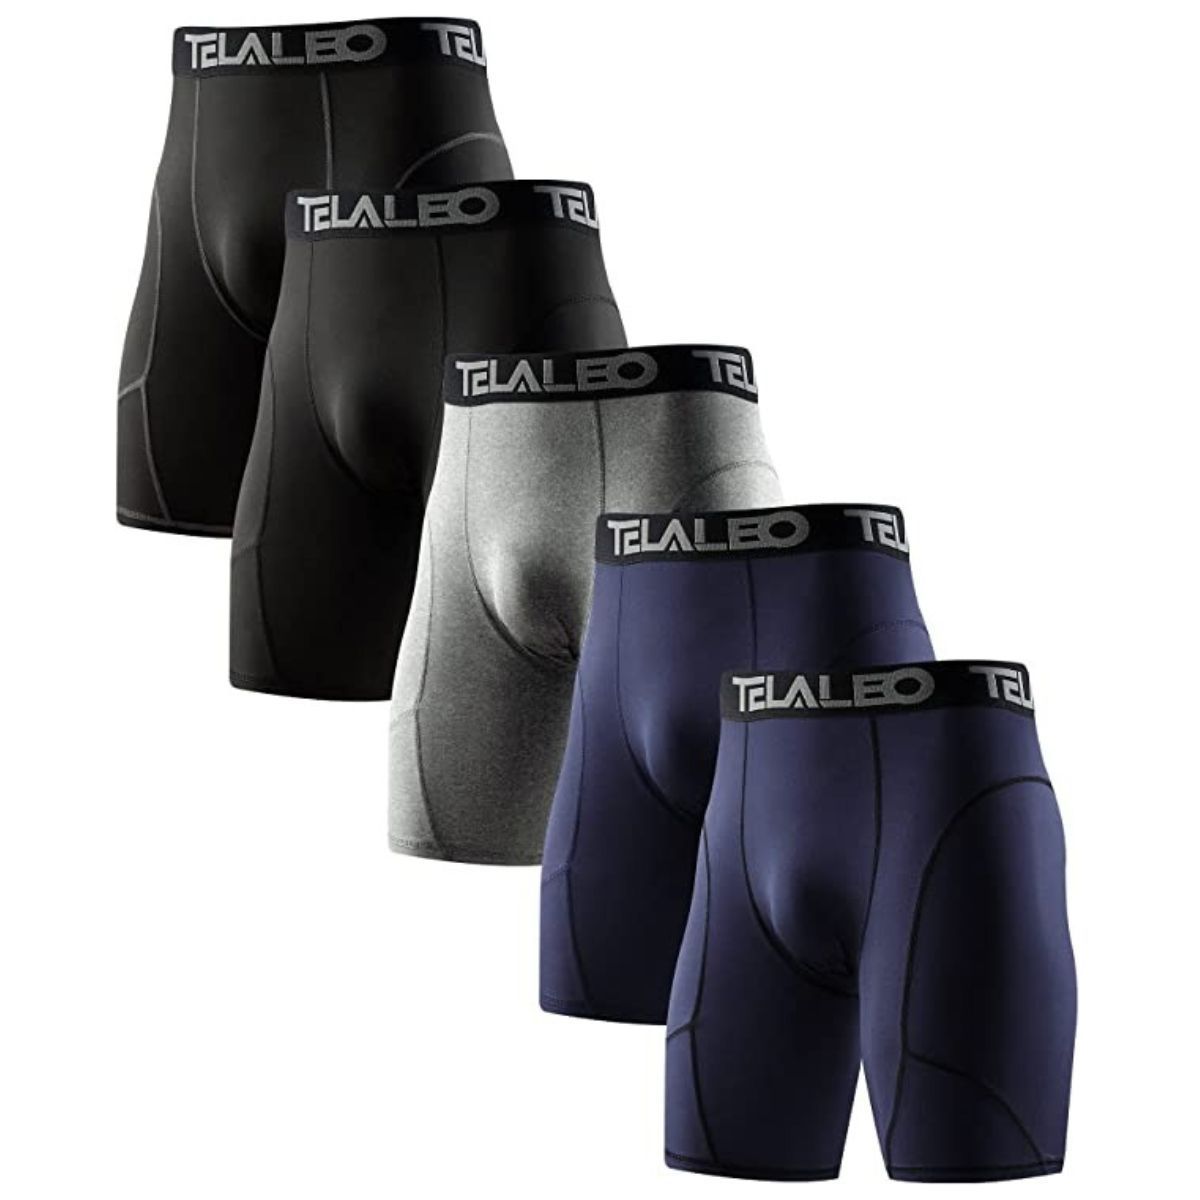 Rugby Base Layer Shorts Quick-Drying Fabric Protect Leg Skin Shorts for Running Gym Cycling Roadbox Compression Shorts Men 3 Pack 